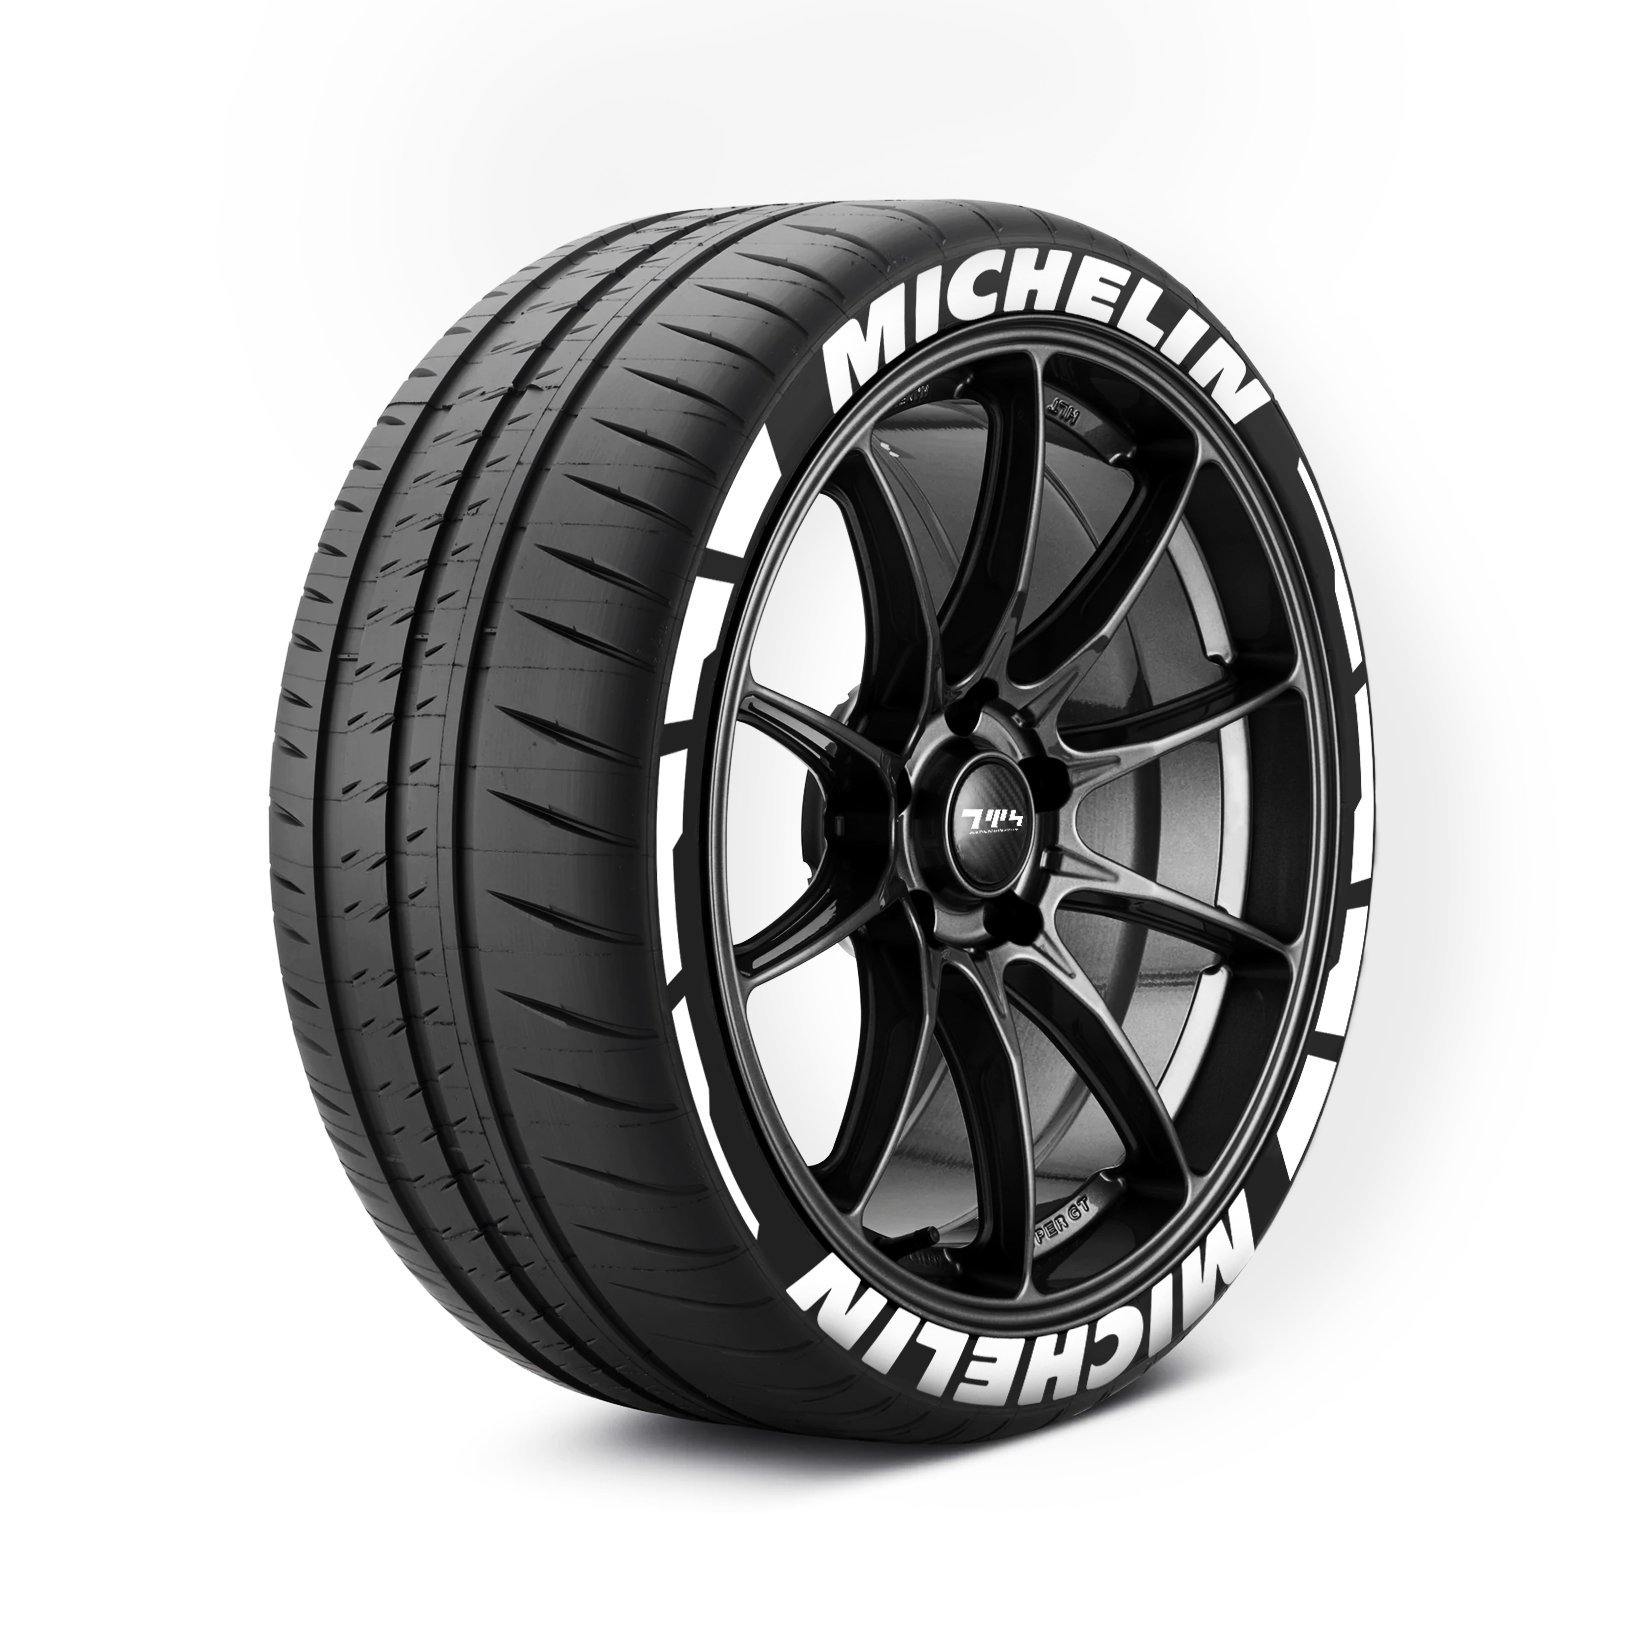 MICHELIN Tyre Stickers with flares - Tyre Wall Stickers